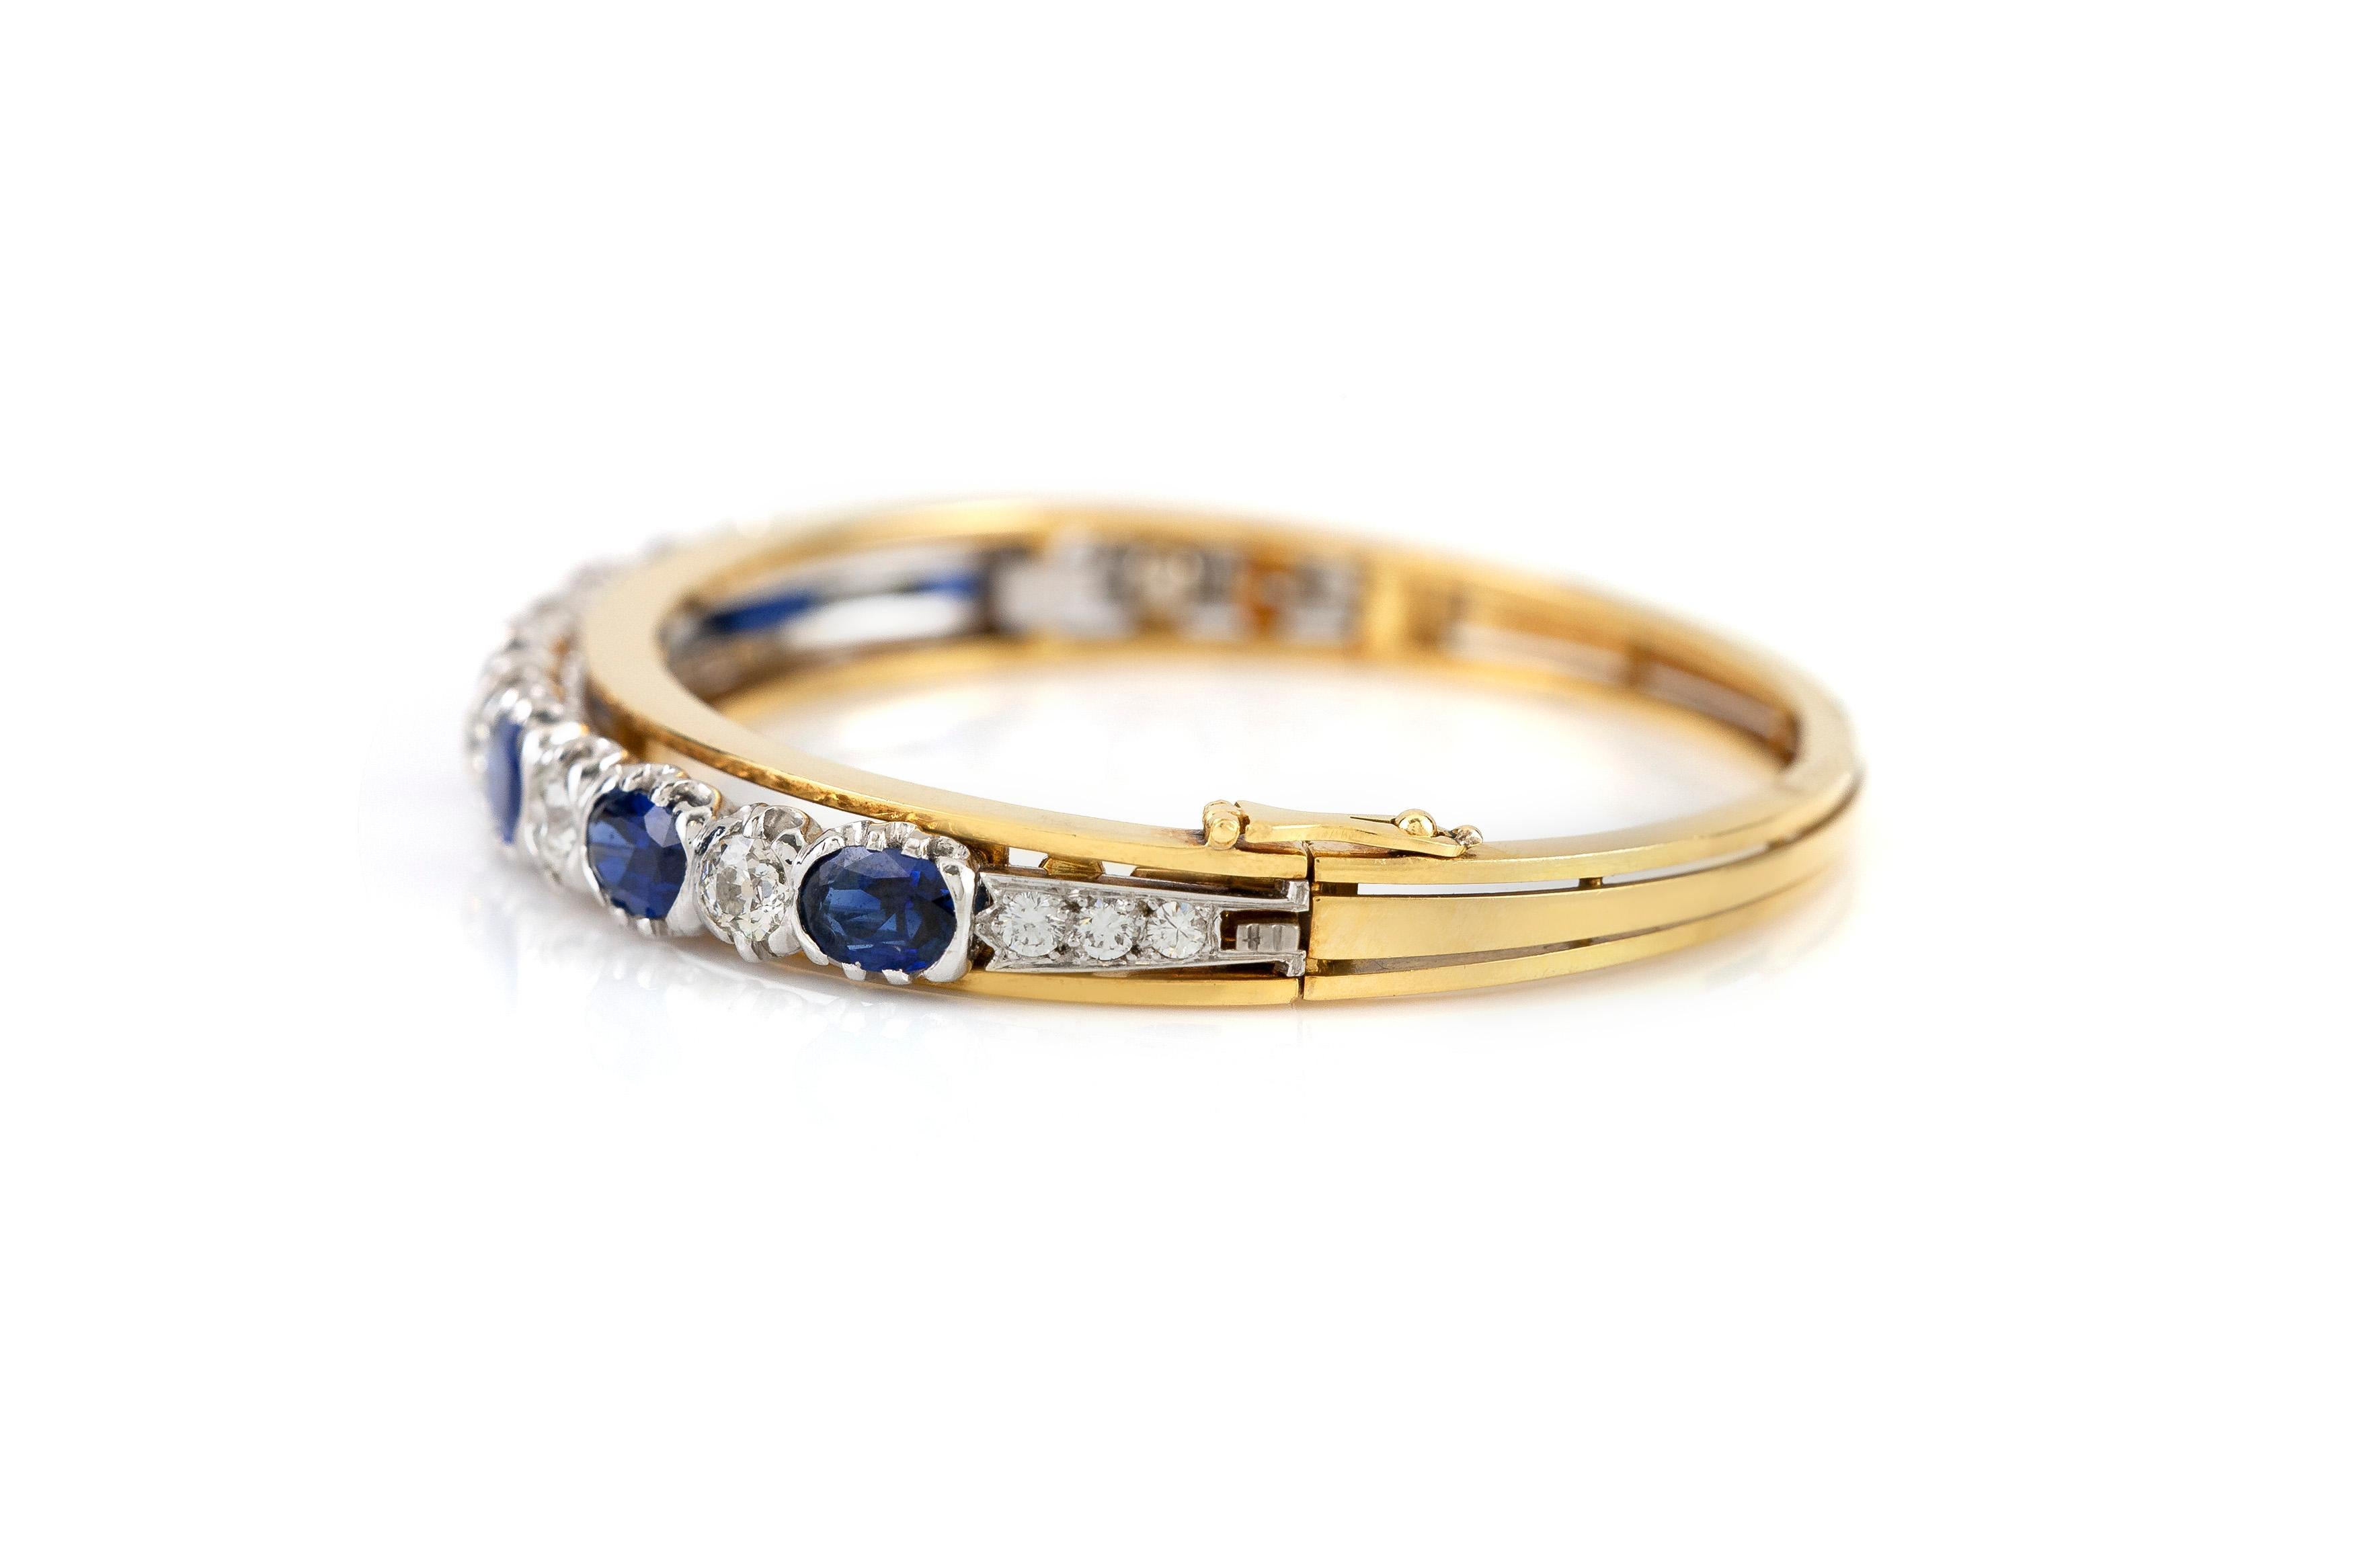 The bangle is finely crafted in 18k yellow gold with sapphire weighing approximately total of 5.00 carat and diamonds weighing approximately total of 2.50 cara.